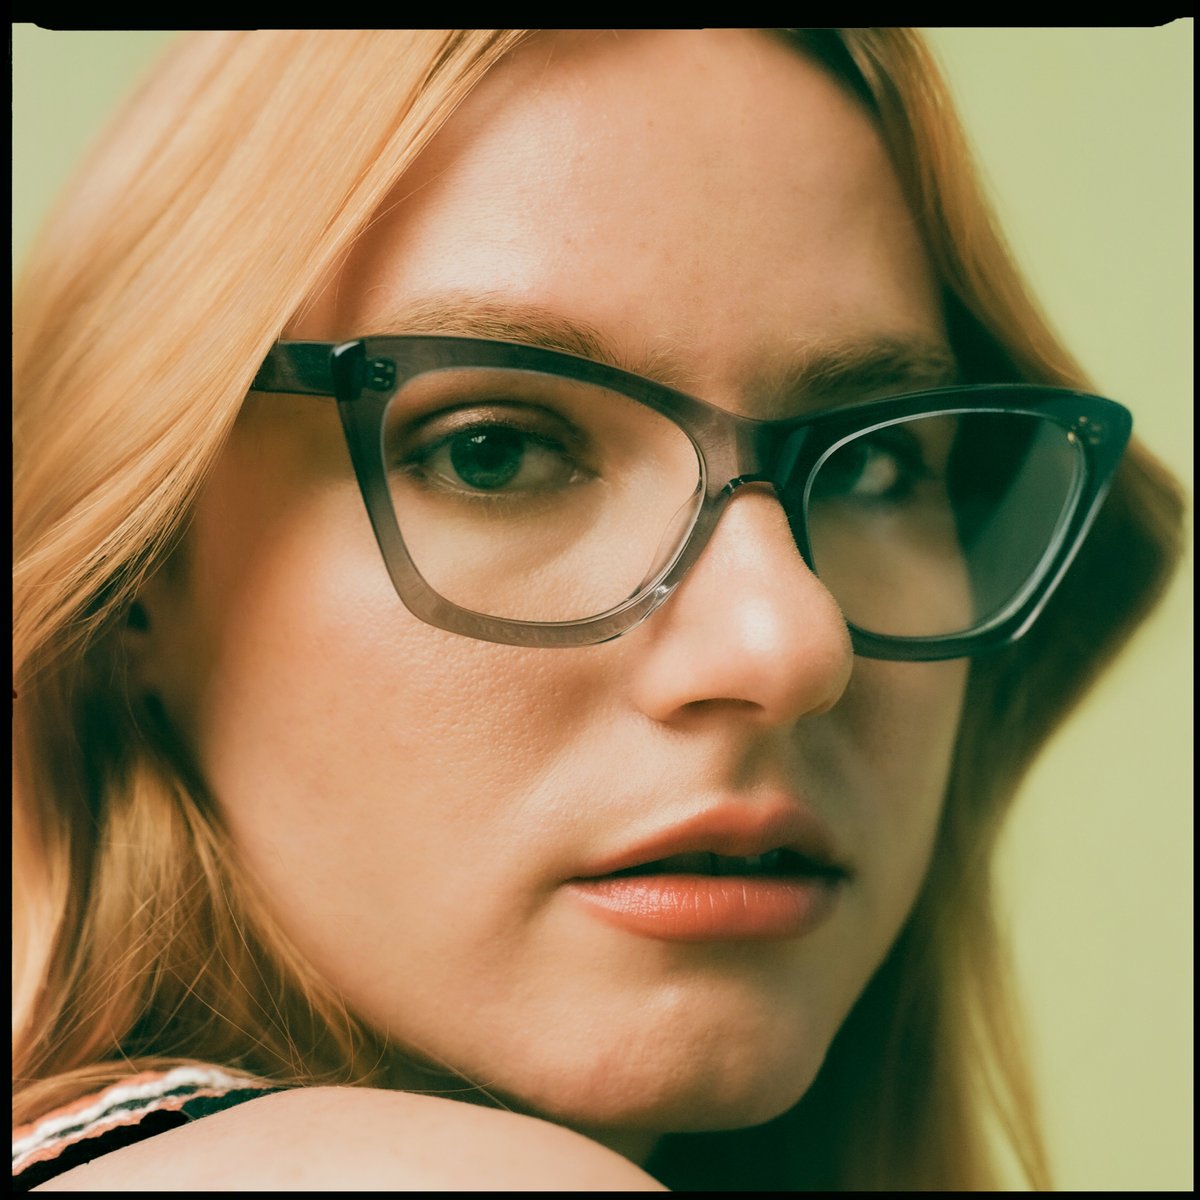 The bestselling Rose frame returns, in a new smaller size and with new colors like this Smoky Blue shown on Forrest. #SeeWithLove | thisisdl.com